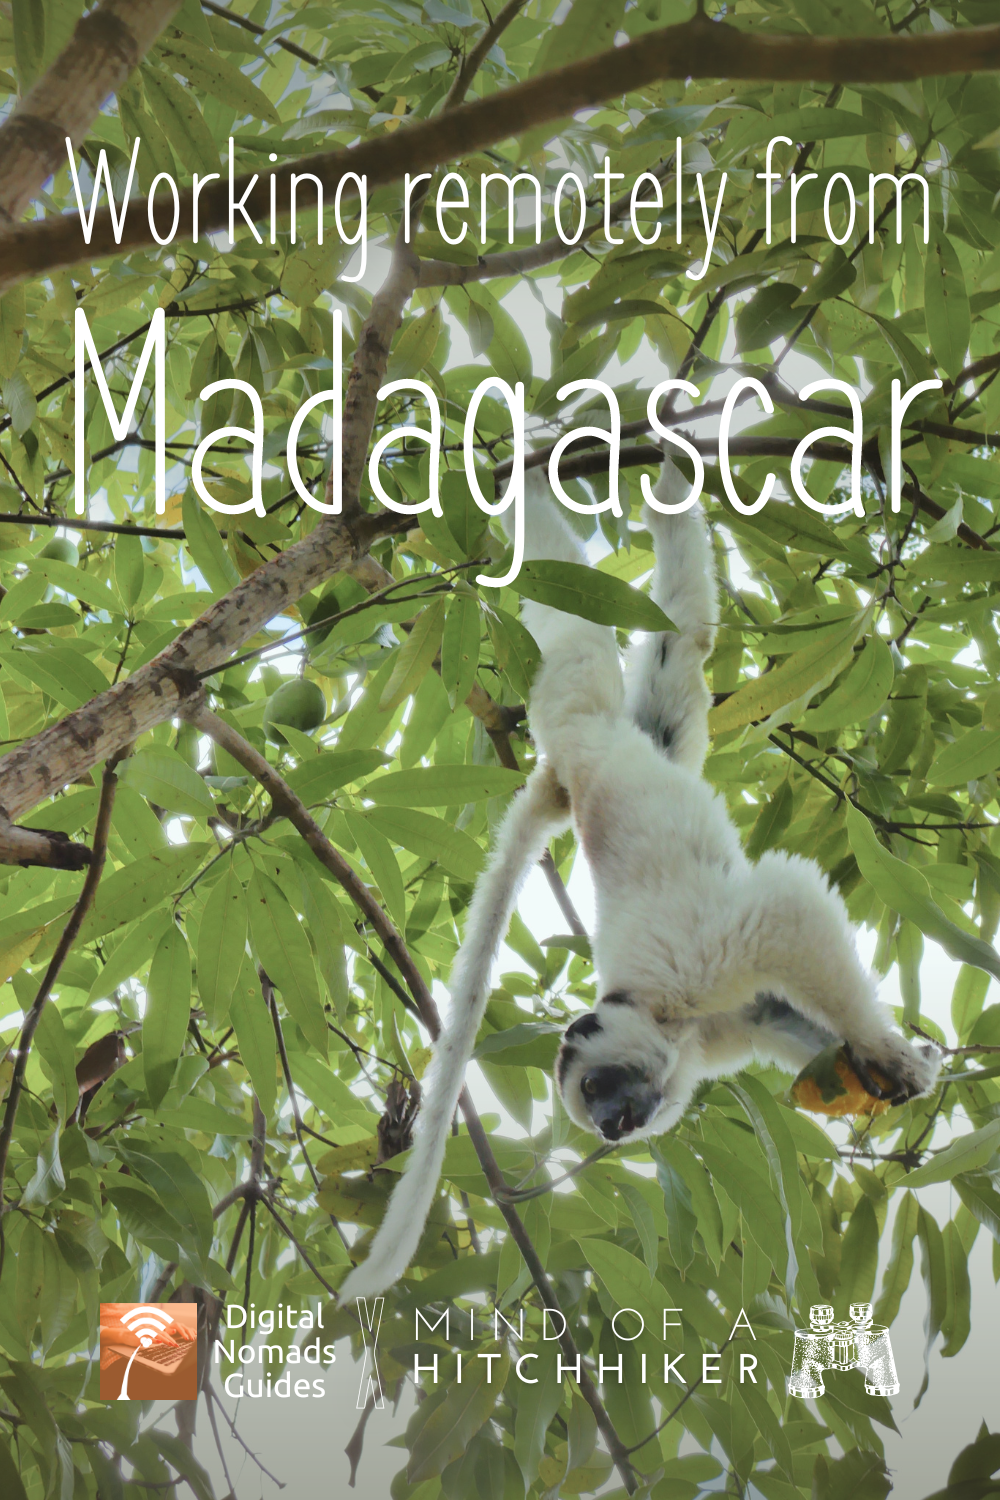 How to work remotely from Madagascar and is it possible at all